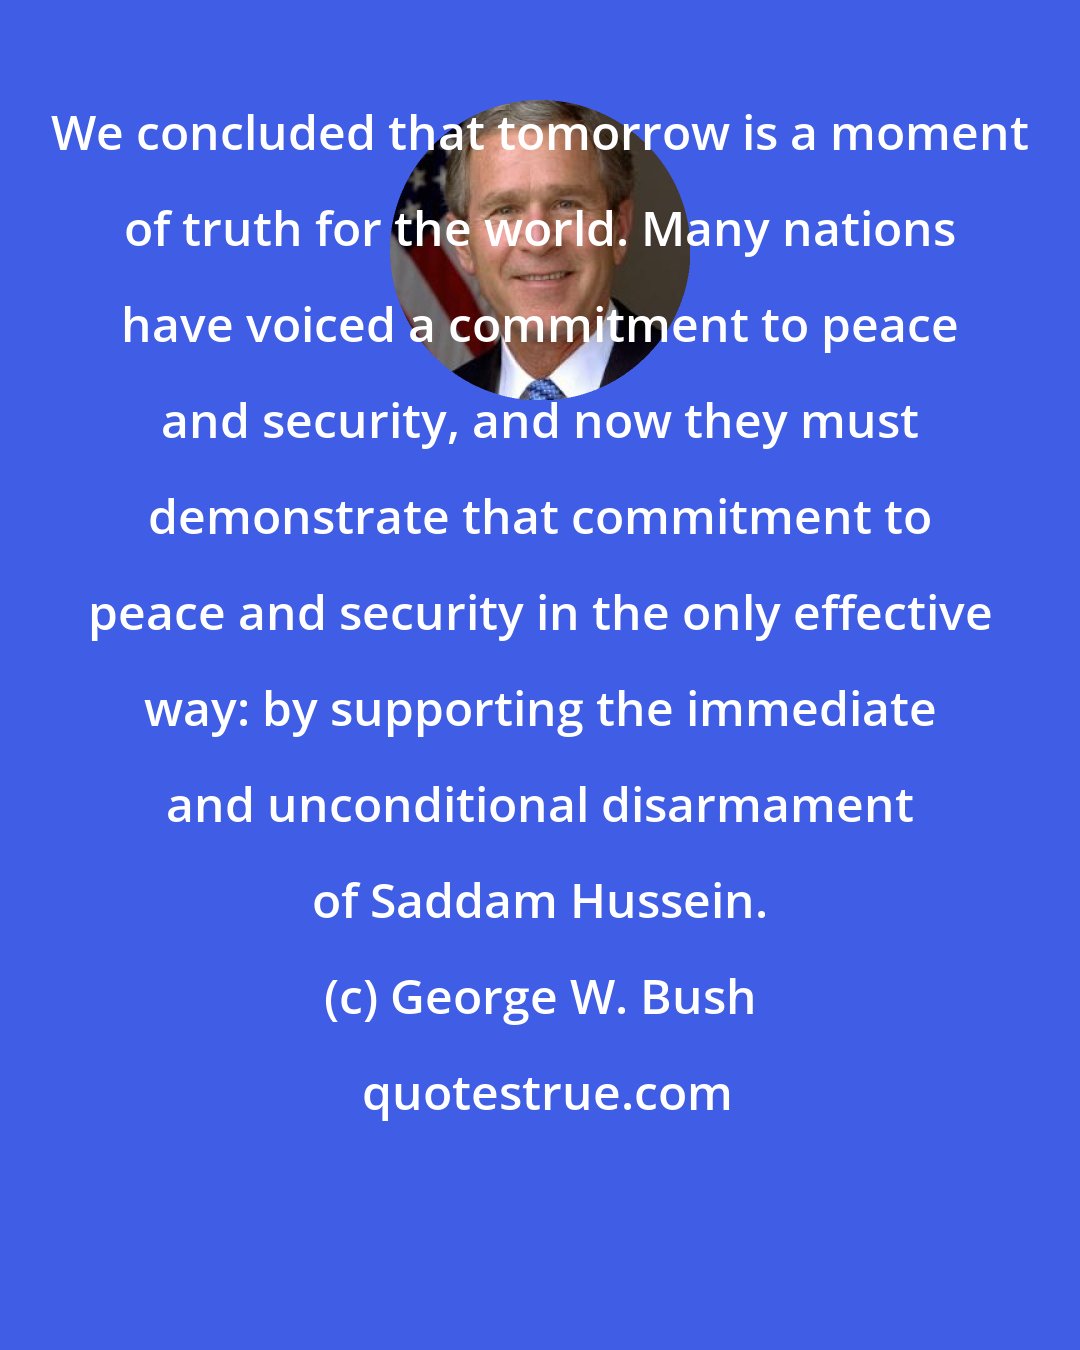 George W. Bush: We concluded that tomorrow is a moment of truth for the world. Many nations have voiced a commitment to peace and security, and now they must demonstrate that commitment to peace and security in the only effective way: by supporting the immediate and unconditional disarmament of Saddam Hussein.